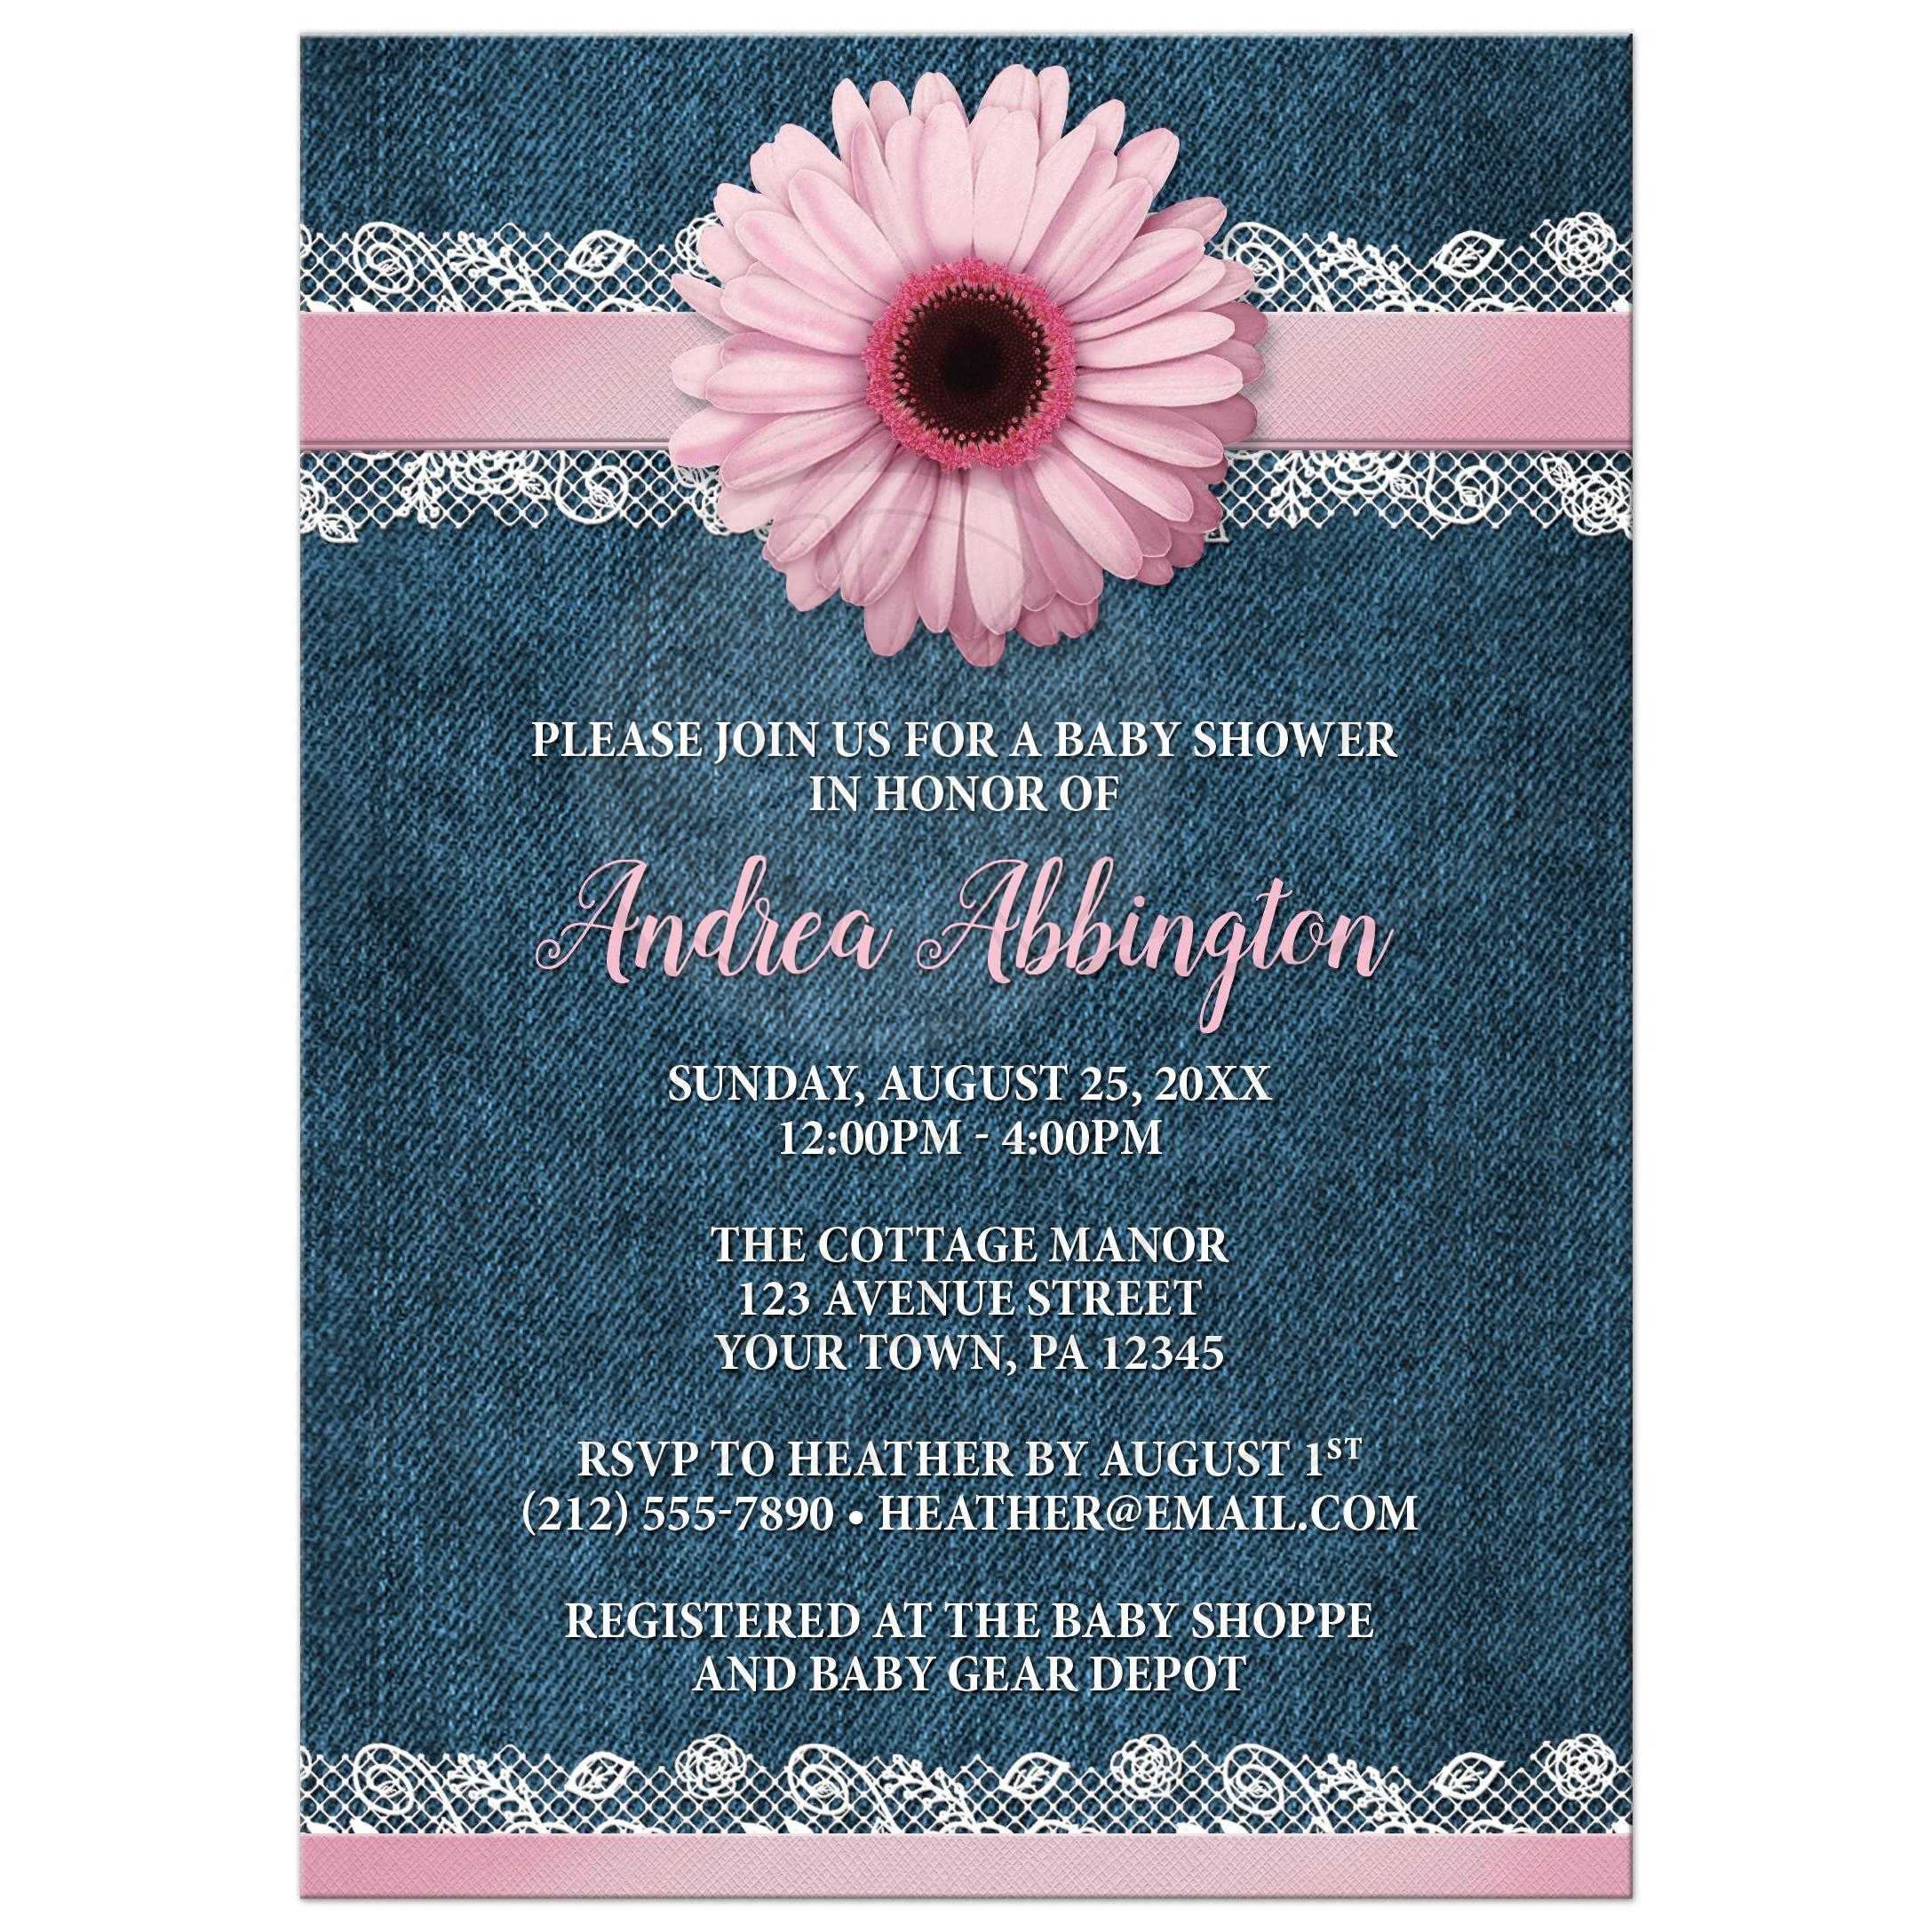 Full Size of Baby Shower:cheap Invitations Baby Shower Pinterest Baby Shower Ideas For Girls Baby Girl Themed Showers Pinterest Nursery Ideas Baby Baby Shower Tableware Creative Baby Shower Ideas Free Printable Baby Shower Games Unique Baby Shower Themes